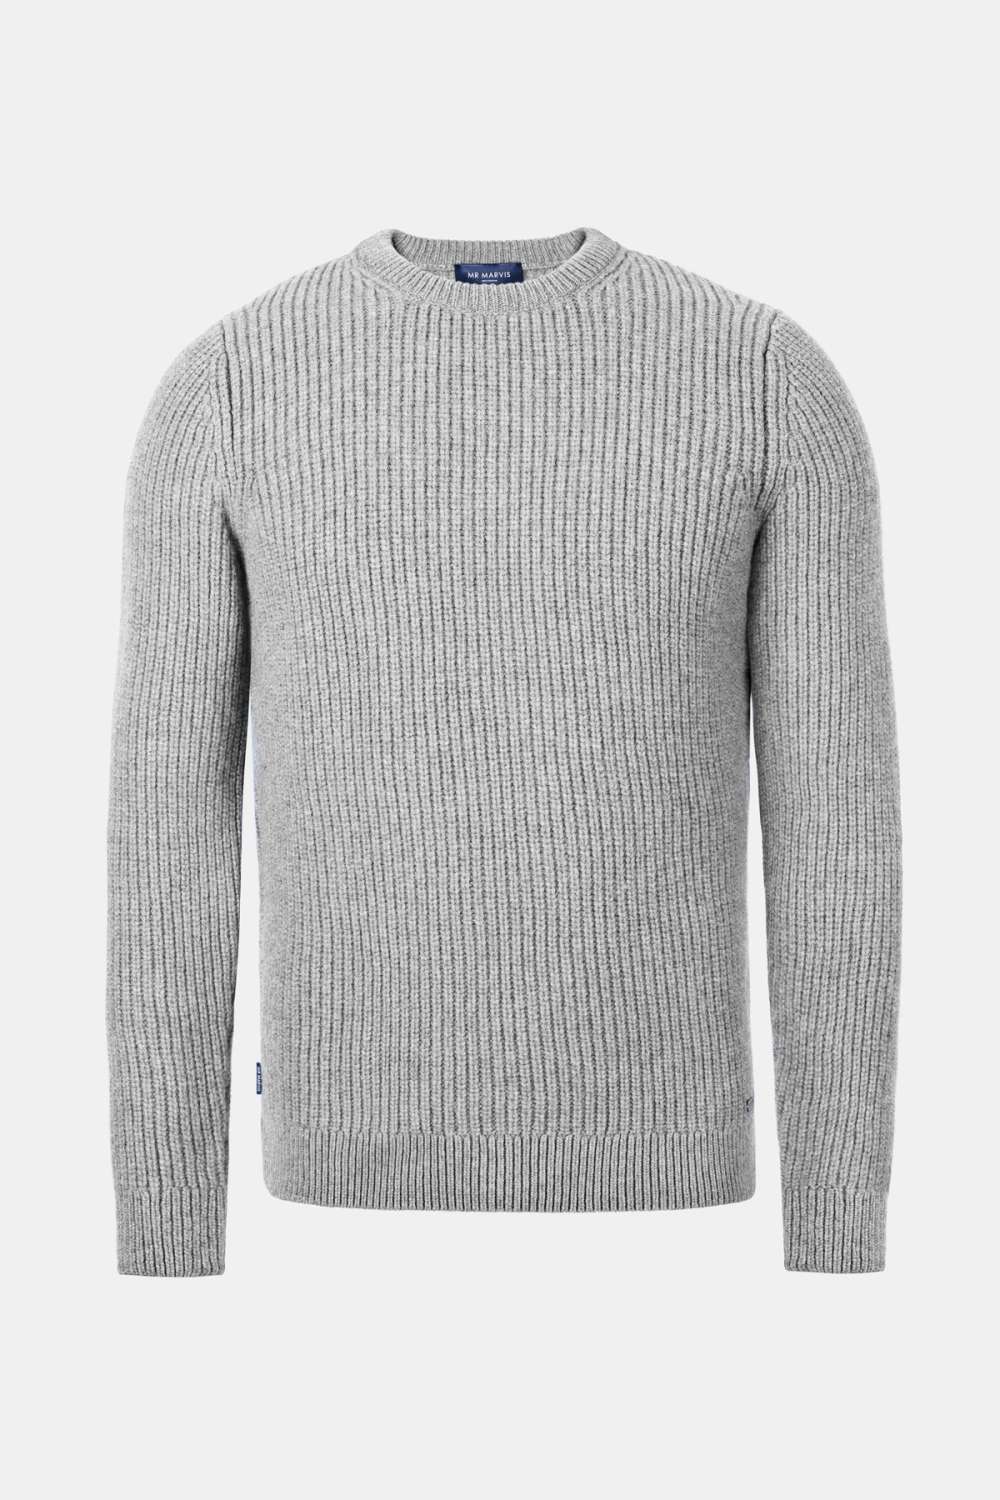 Oysters - The Knit Pullover